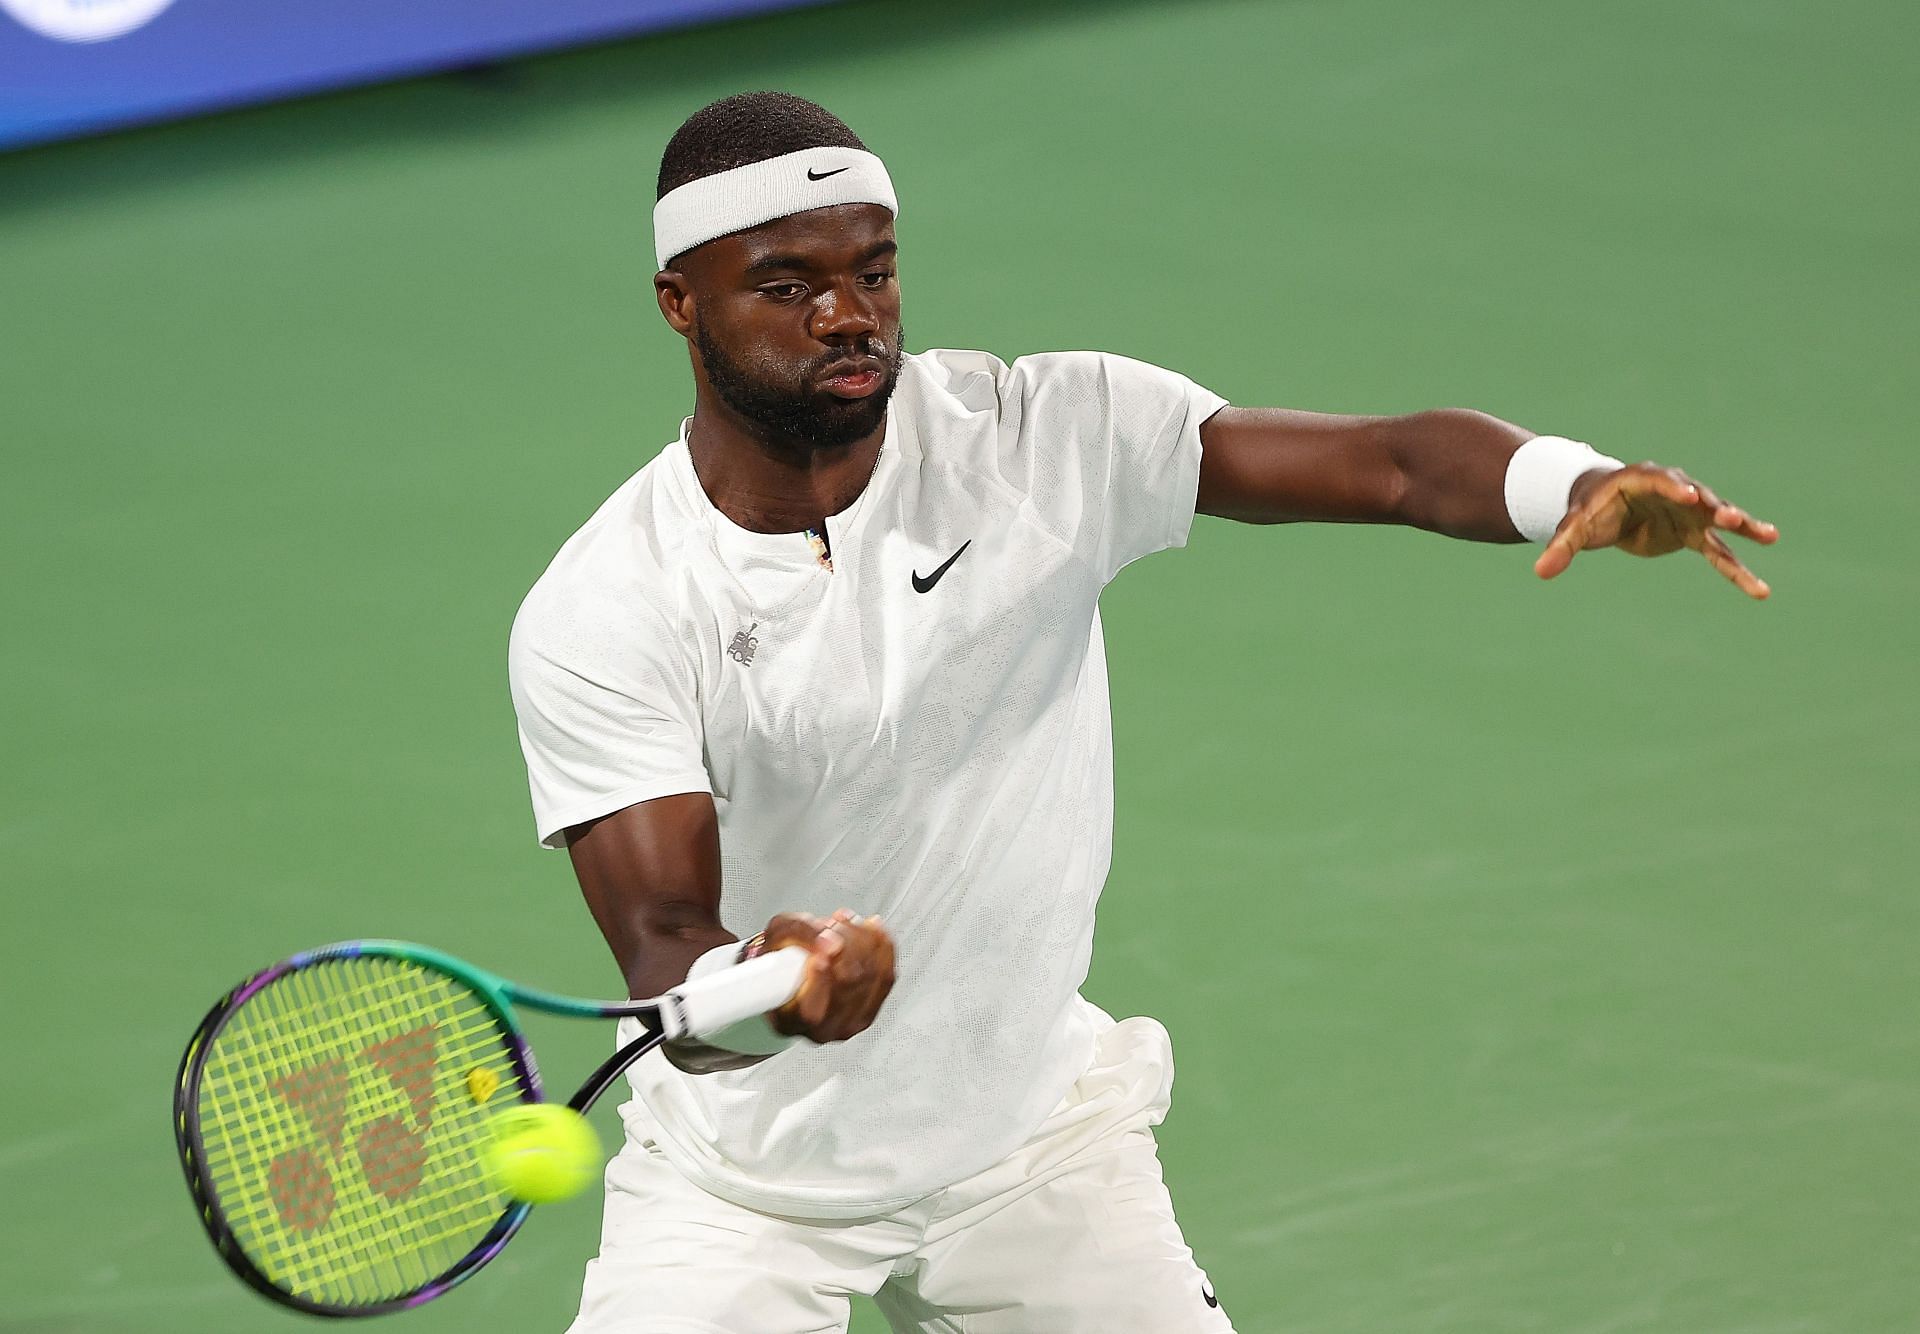 Frances Tiafoe is the tenth seed at the Citi Open